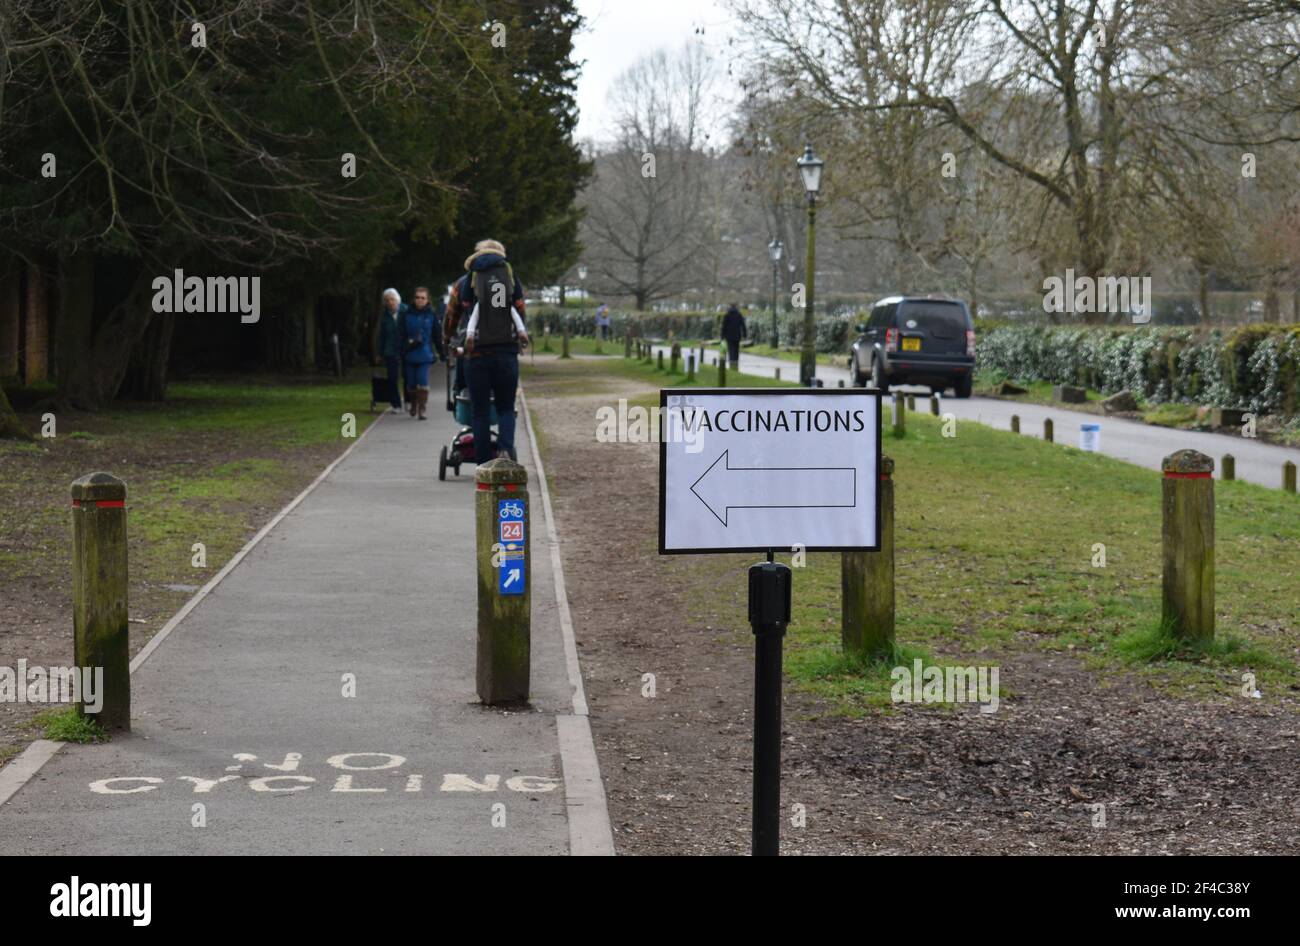 A sign that reads ‘Vaccinations’ with an arrow directing people to a vaccination centre in the UK Stock Photo